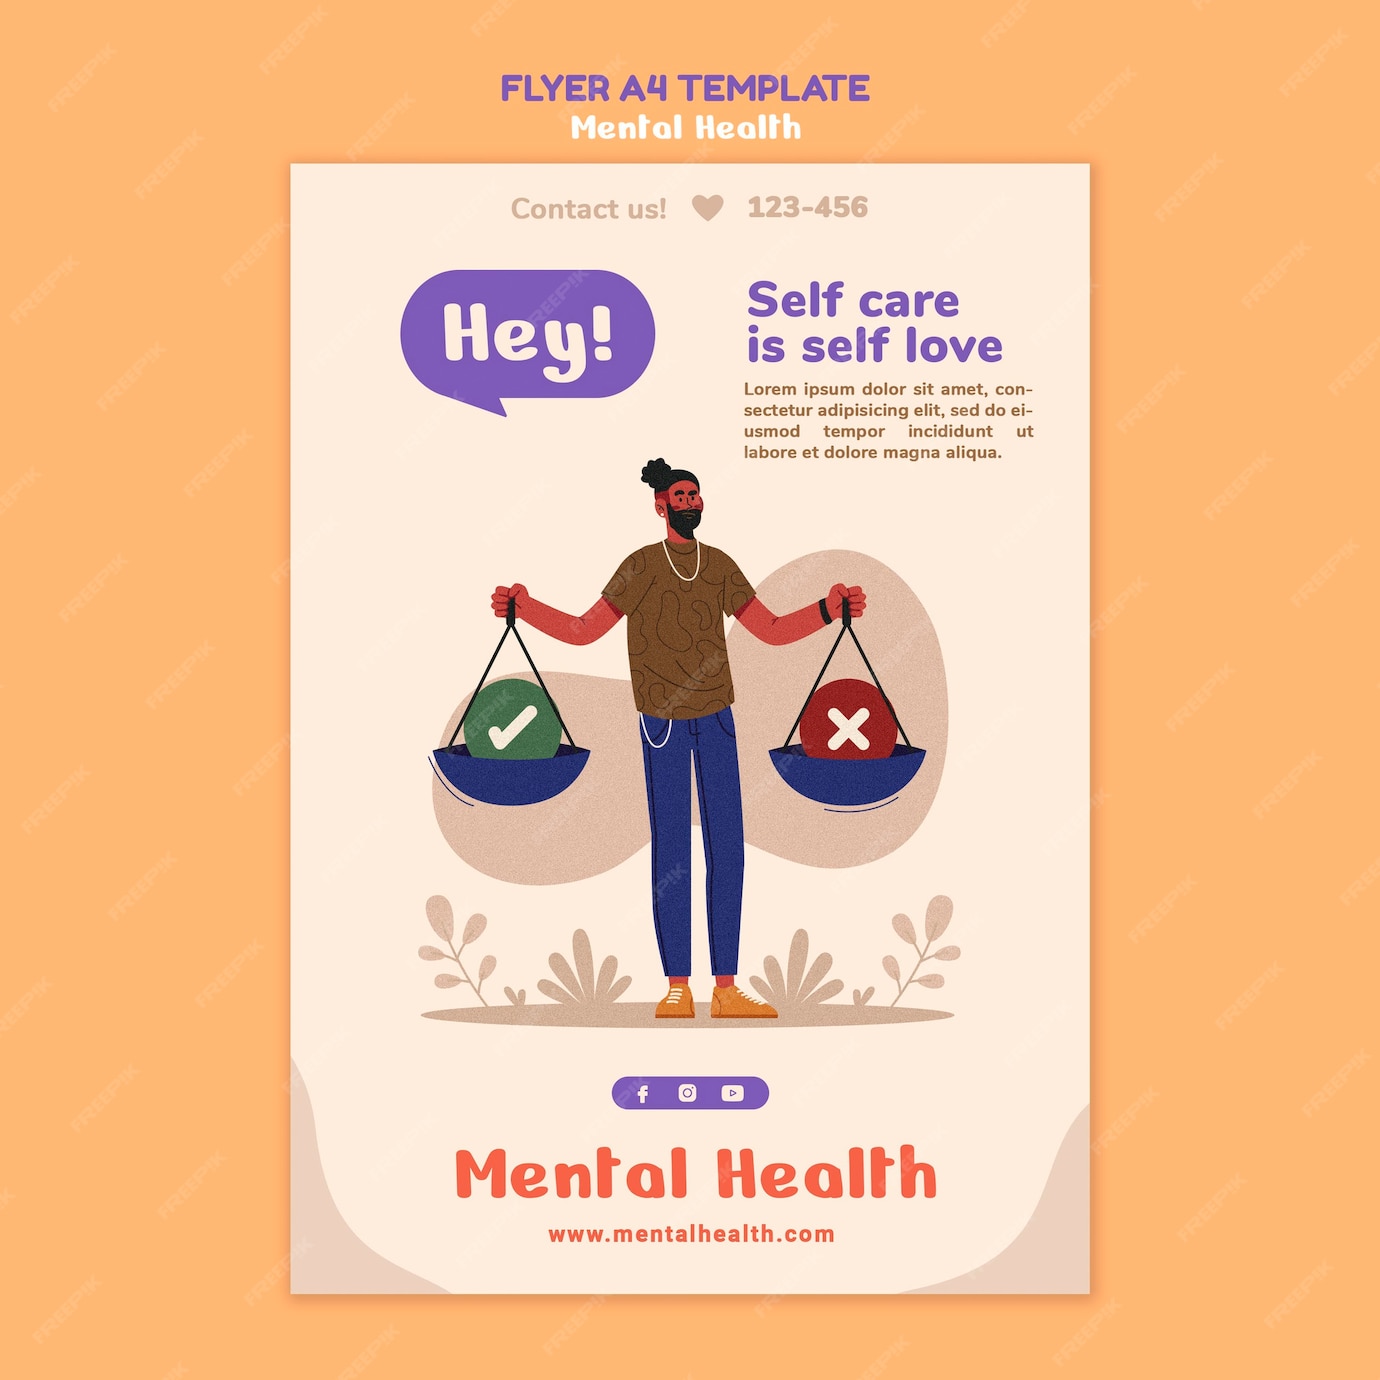 Free PSD Mental health flyer template